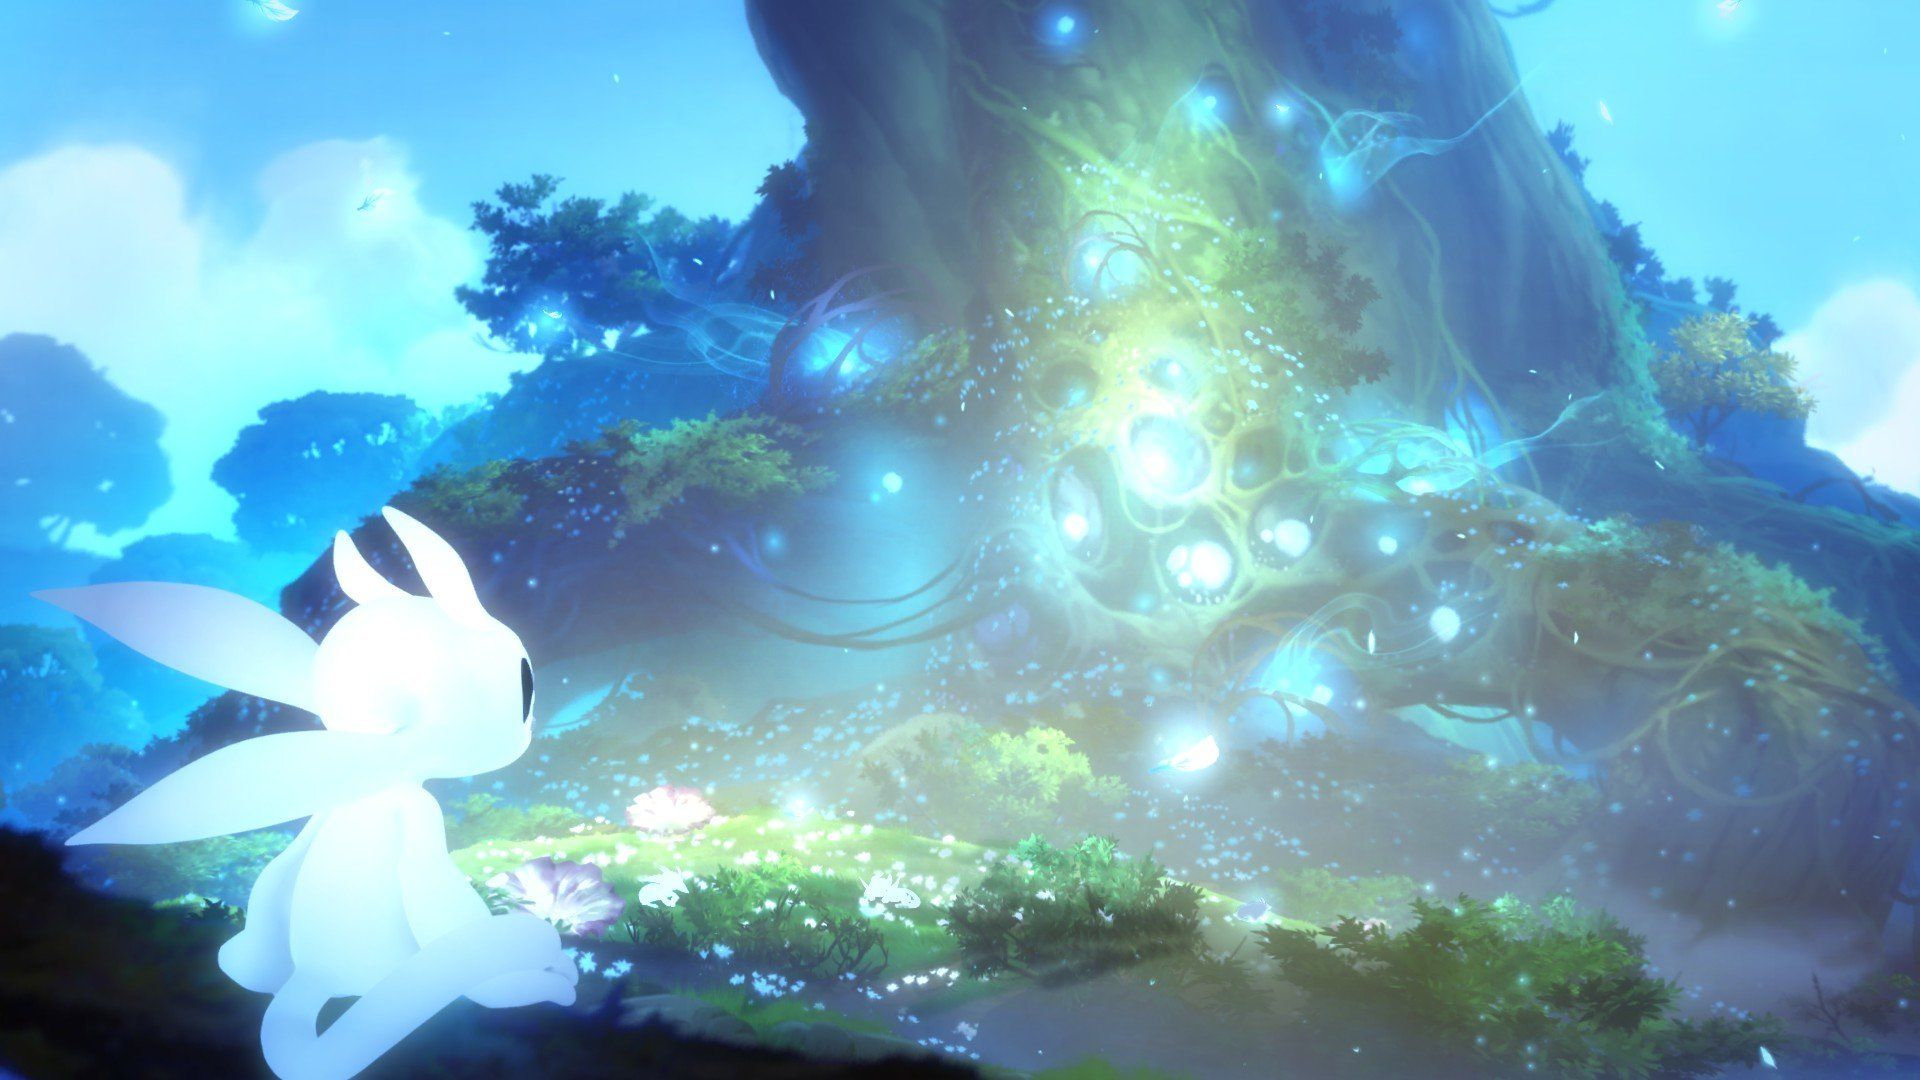 Ori and the Blind Forest Art, Johannes